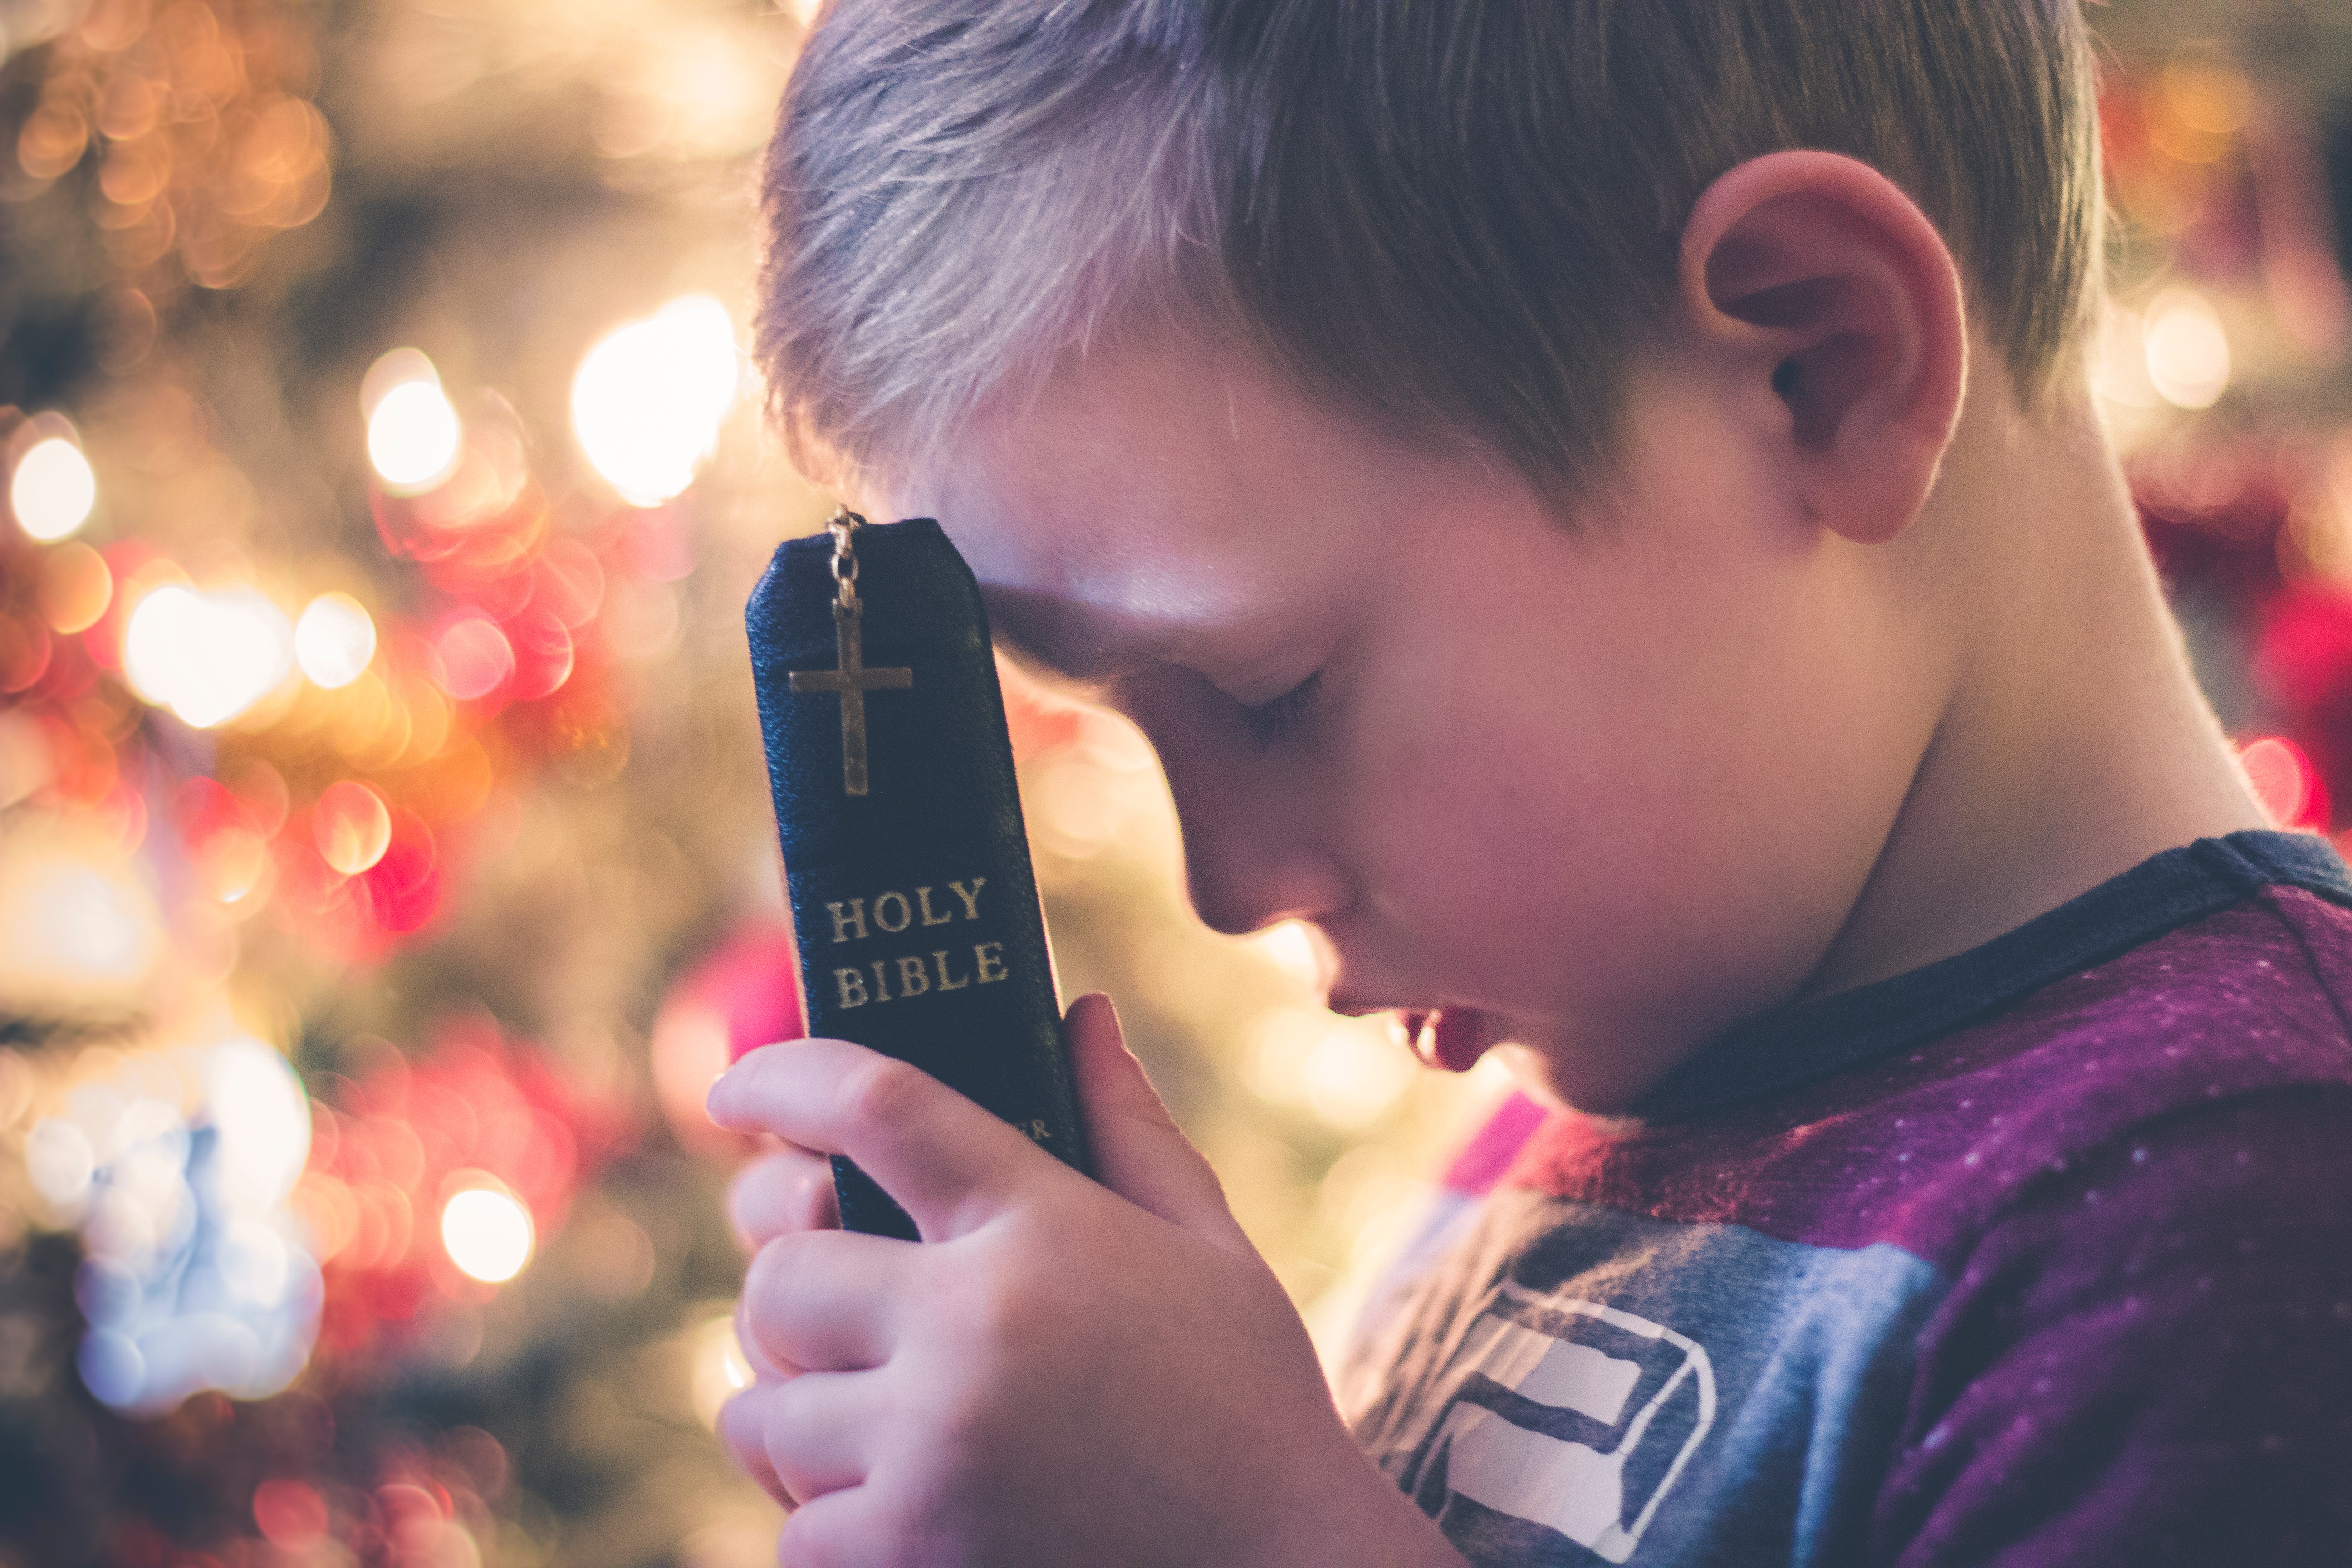 Child with his eyes closed holding onto a bible